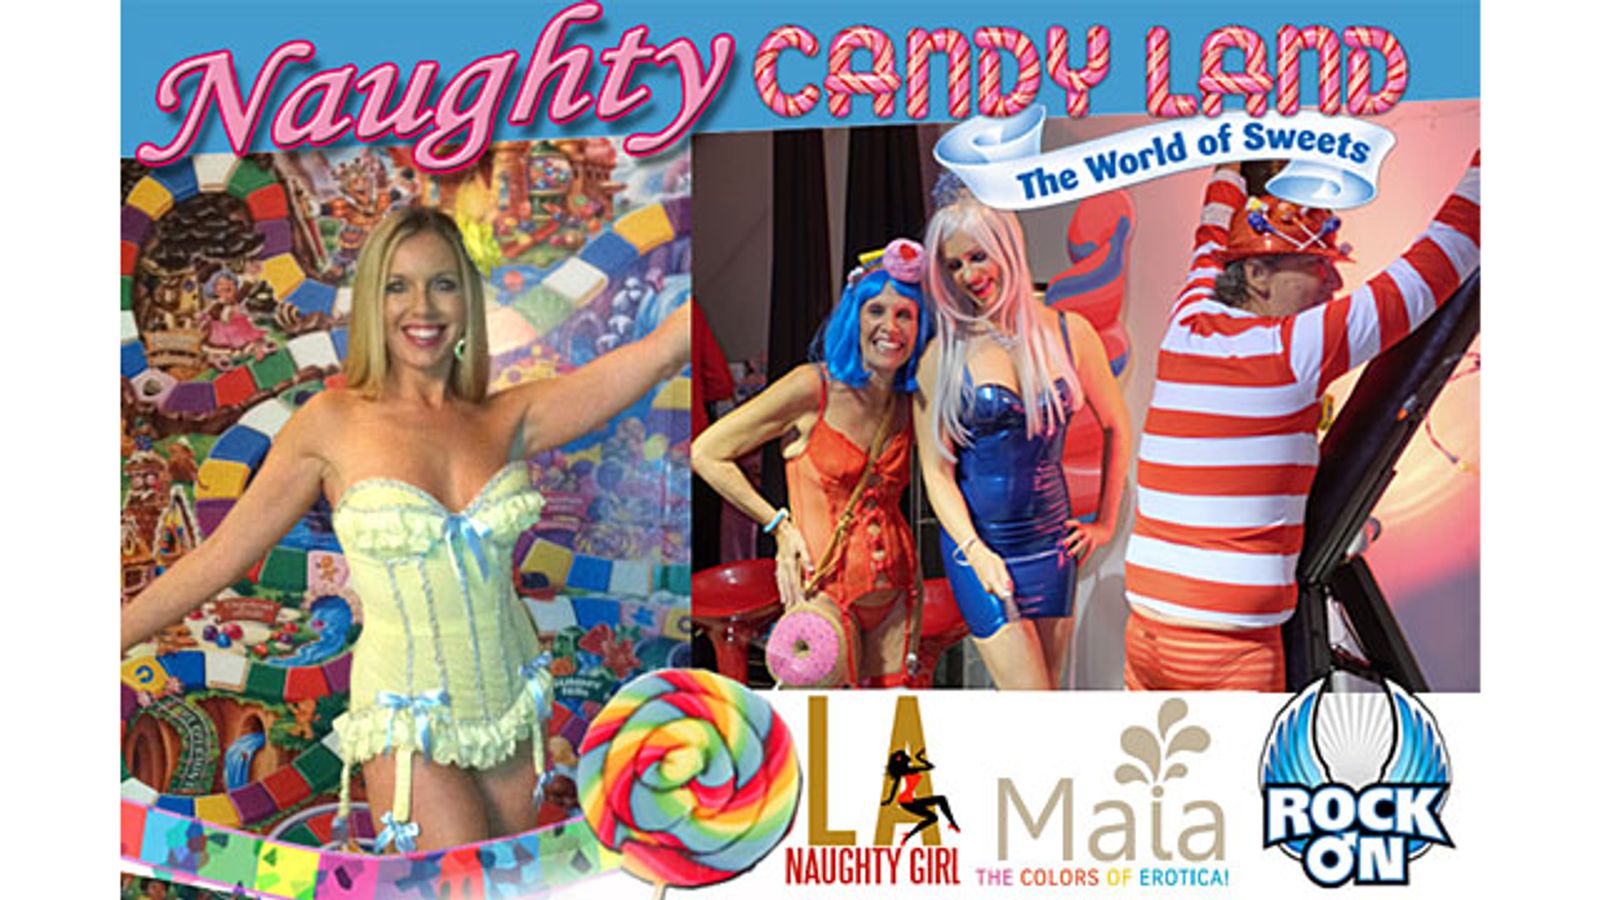 Sienna Sinclaire Teams with Maia Toys, Rock On for Naughty Candy Land